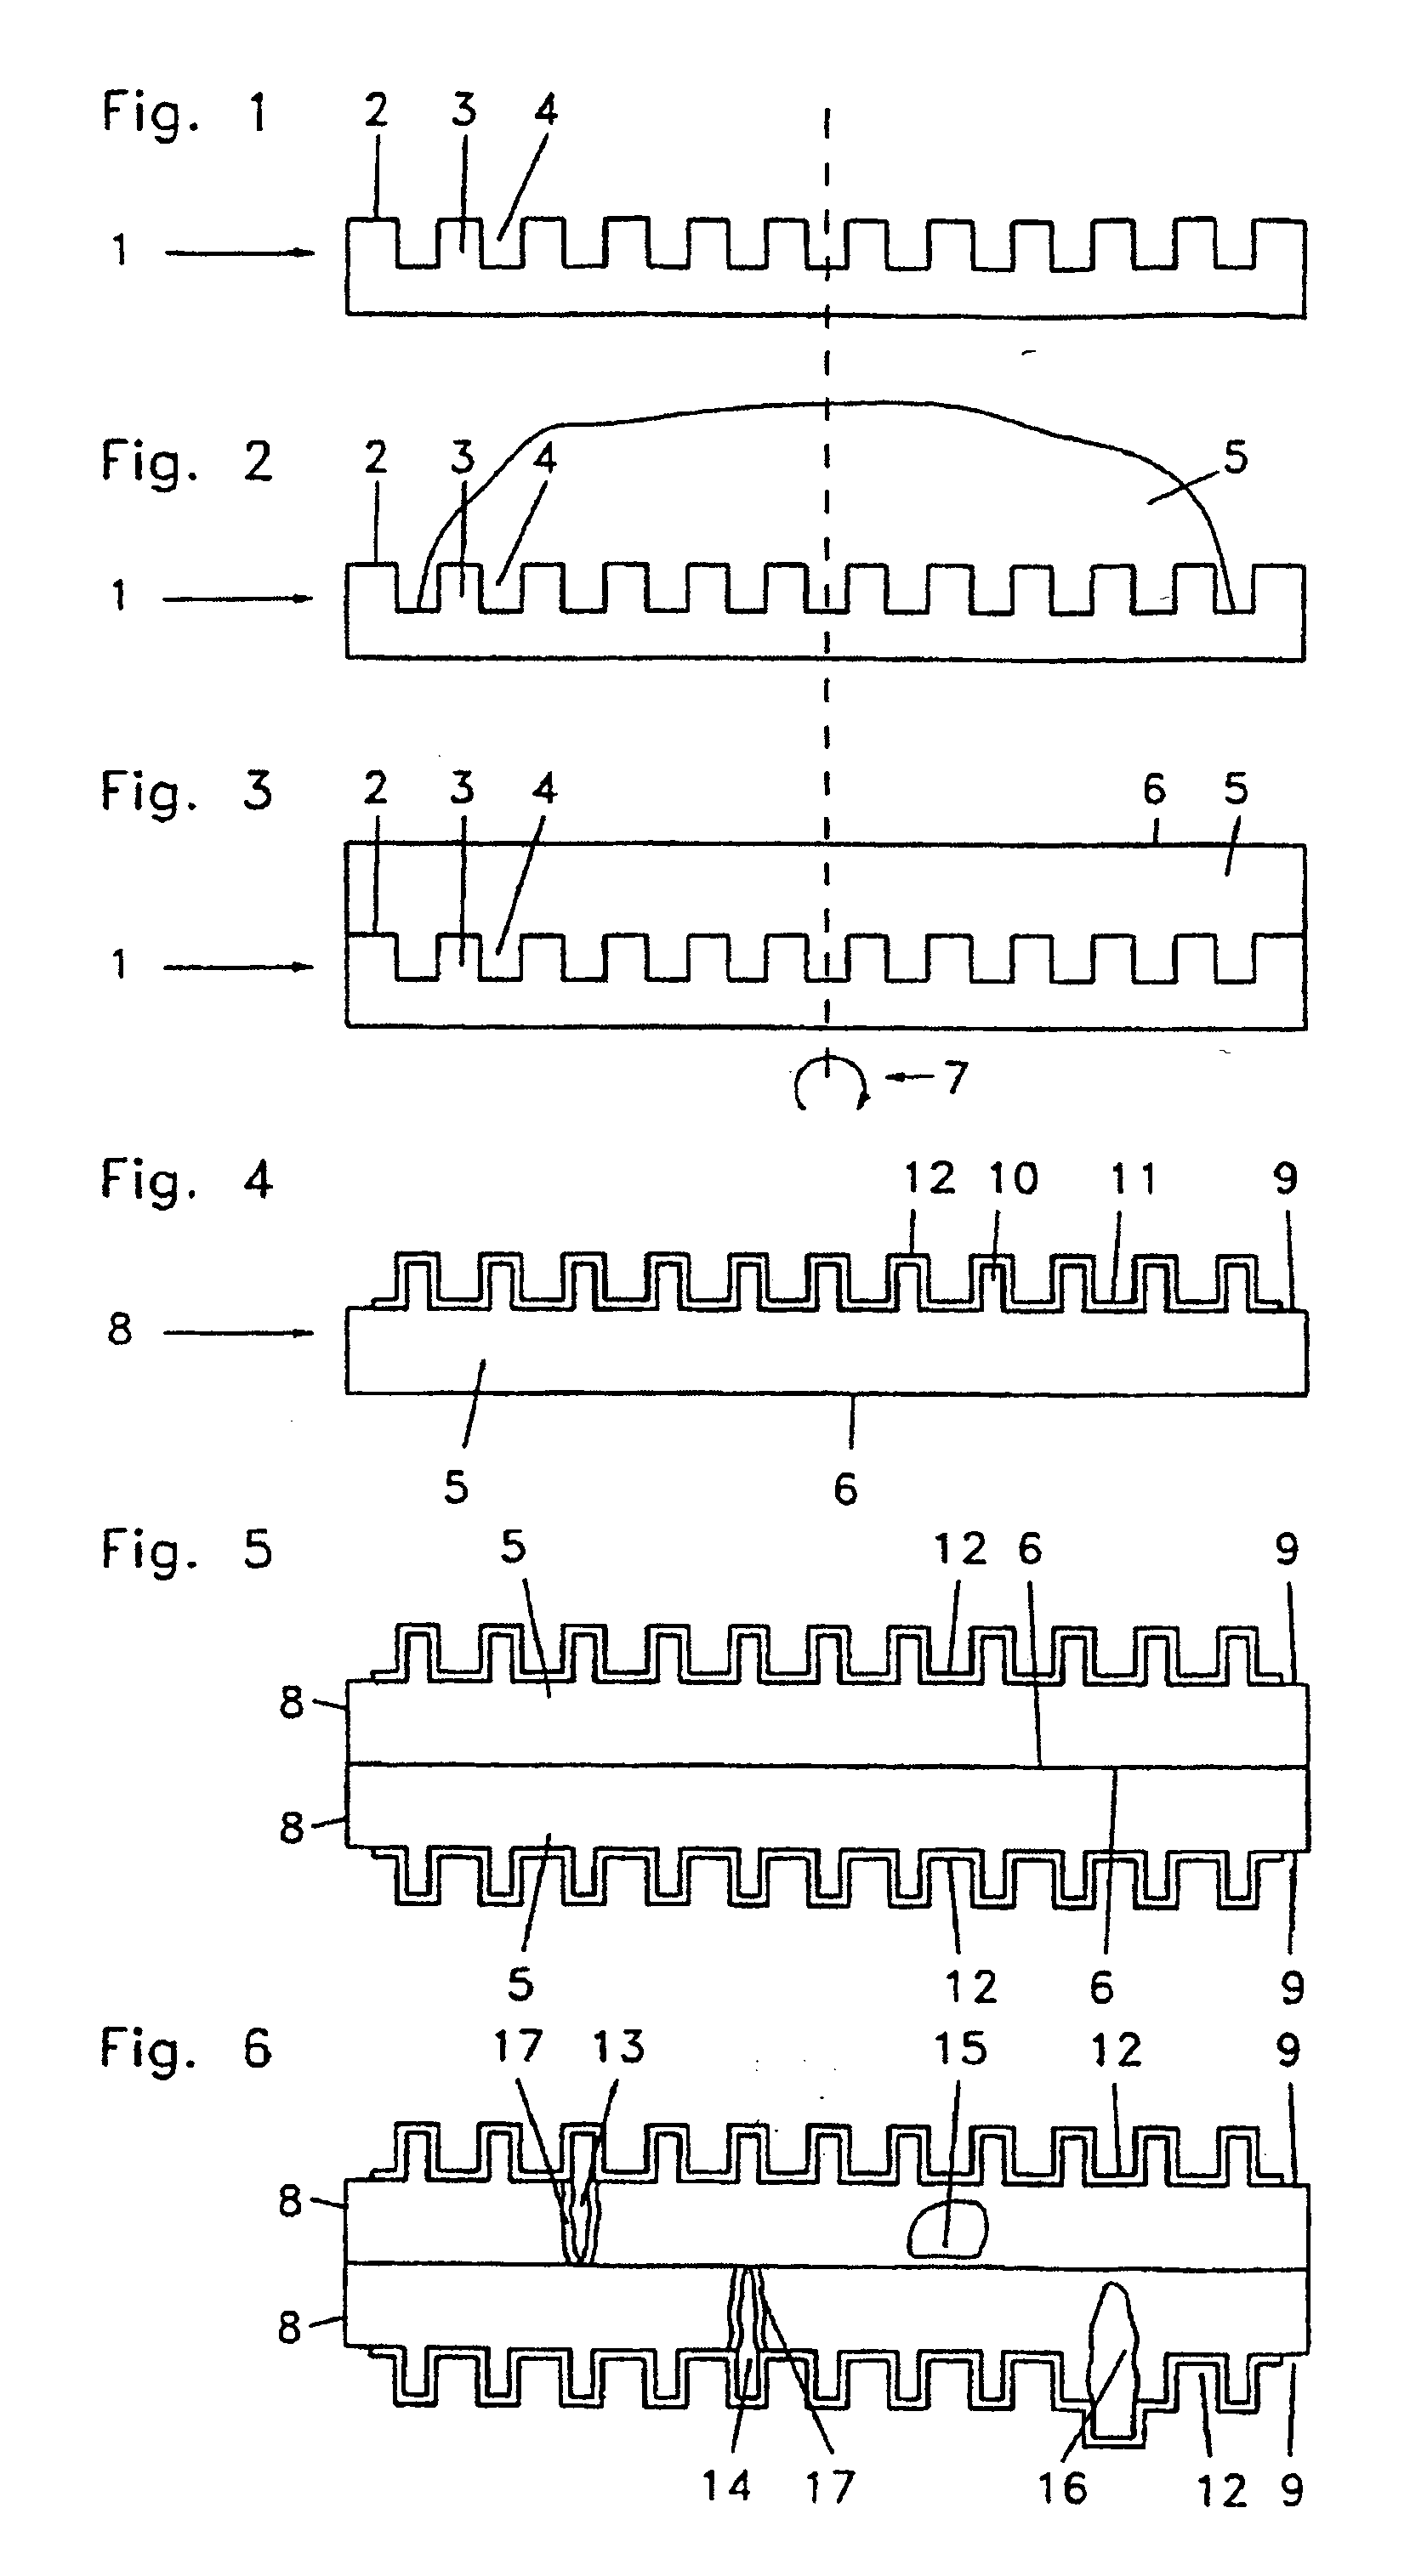 Dielectric actuator or sensor structure and method of making it